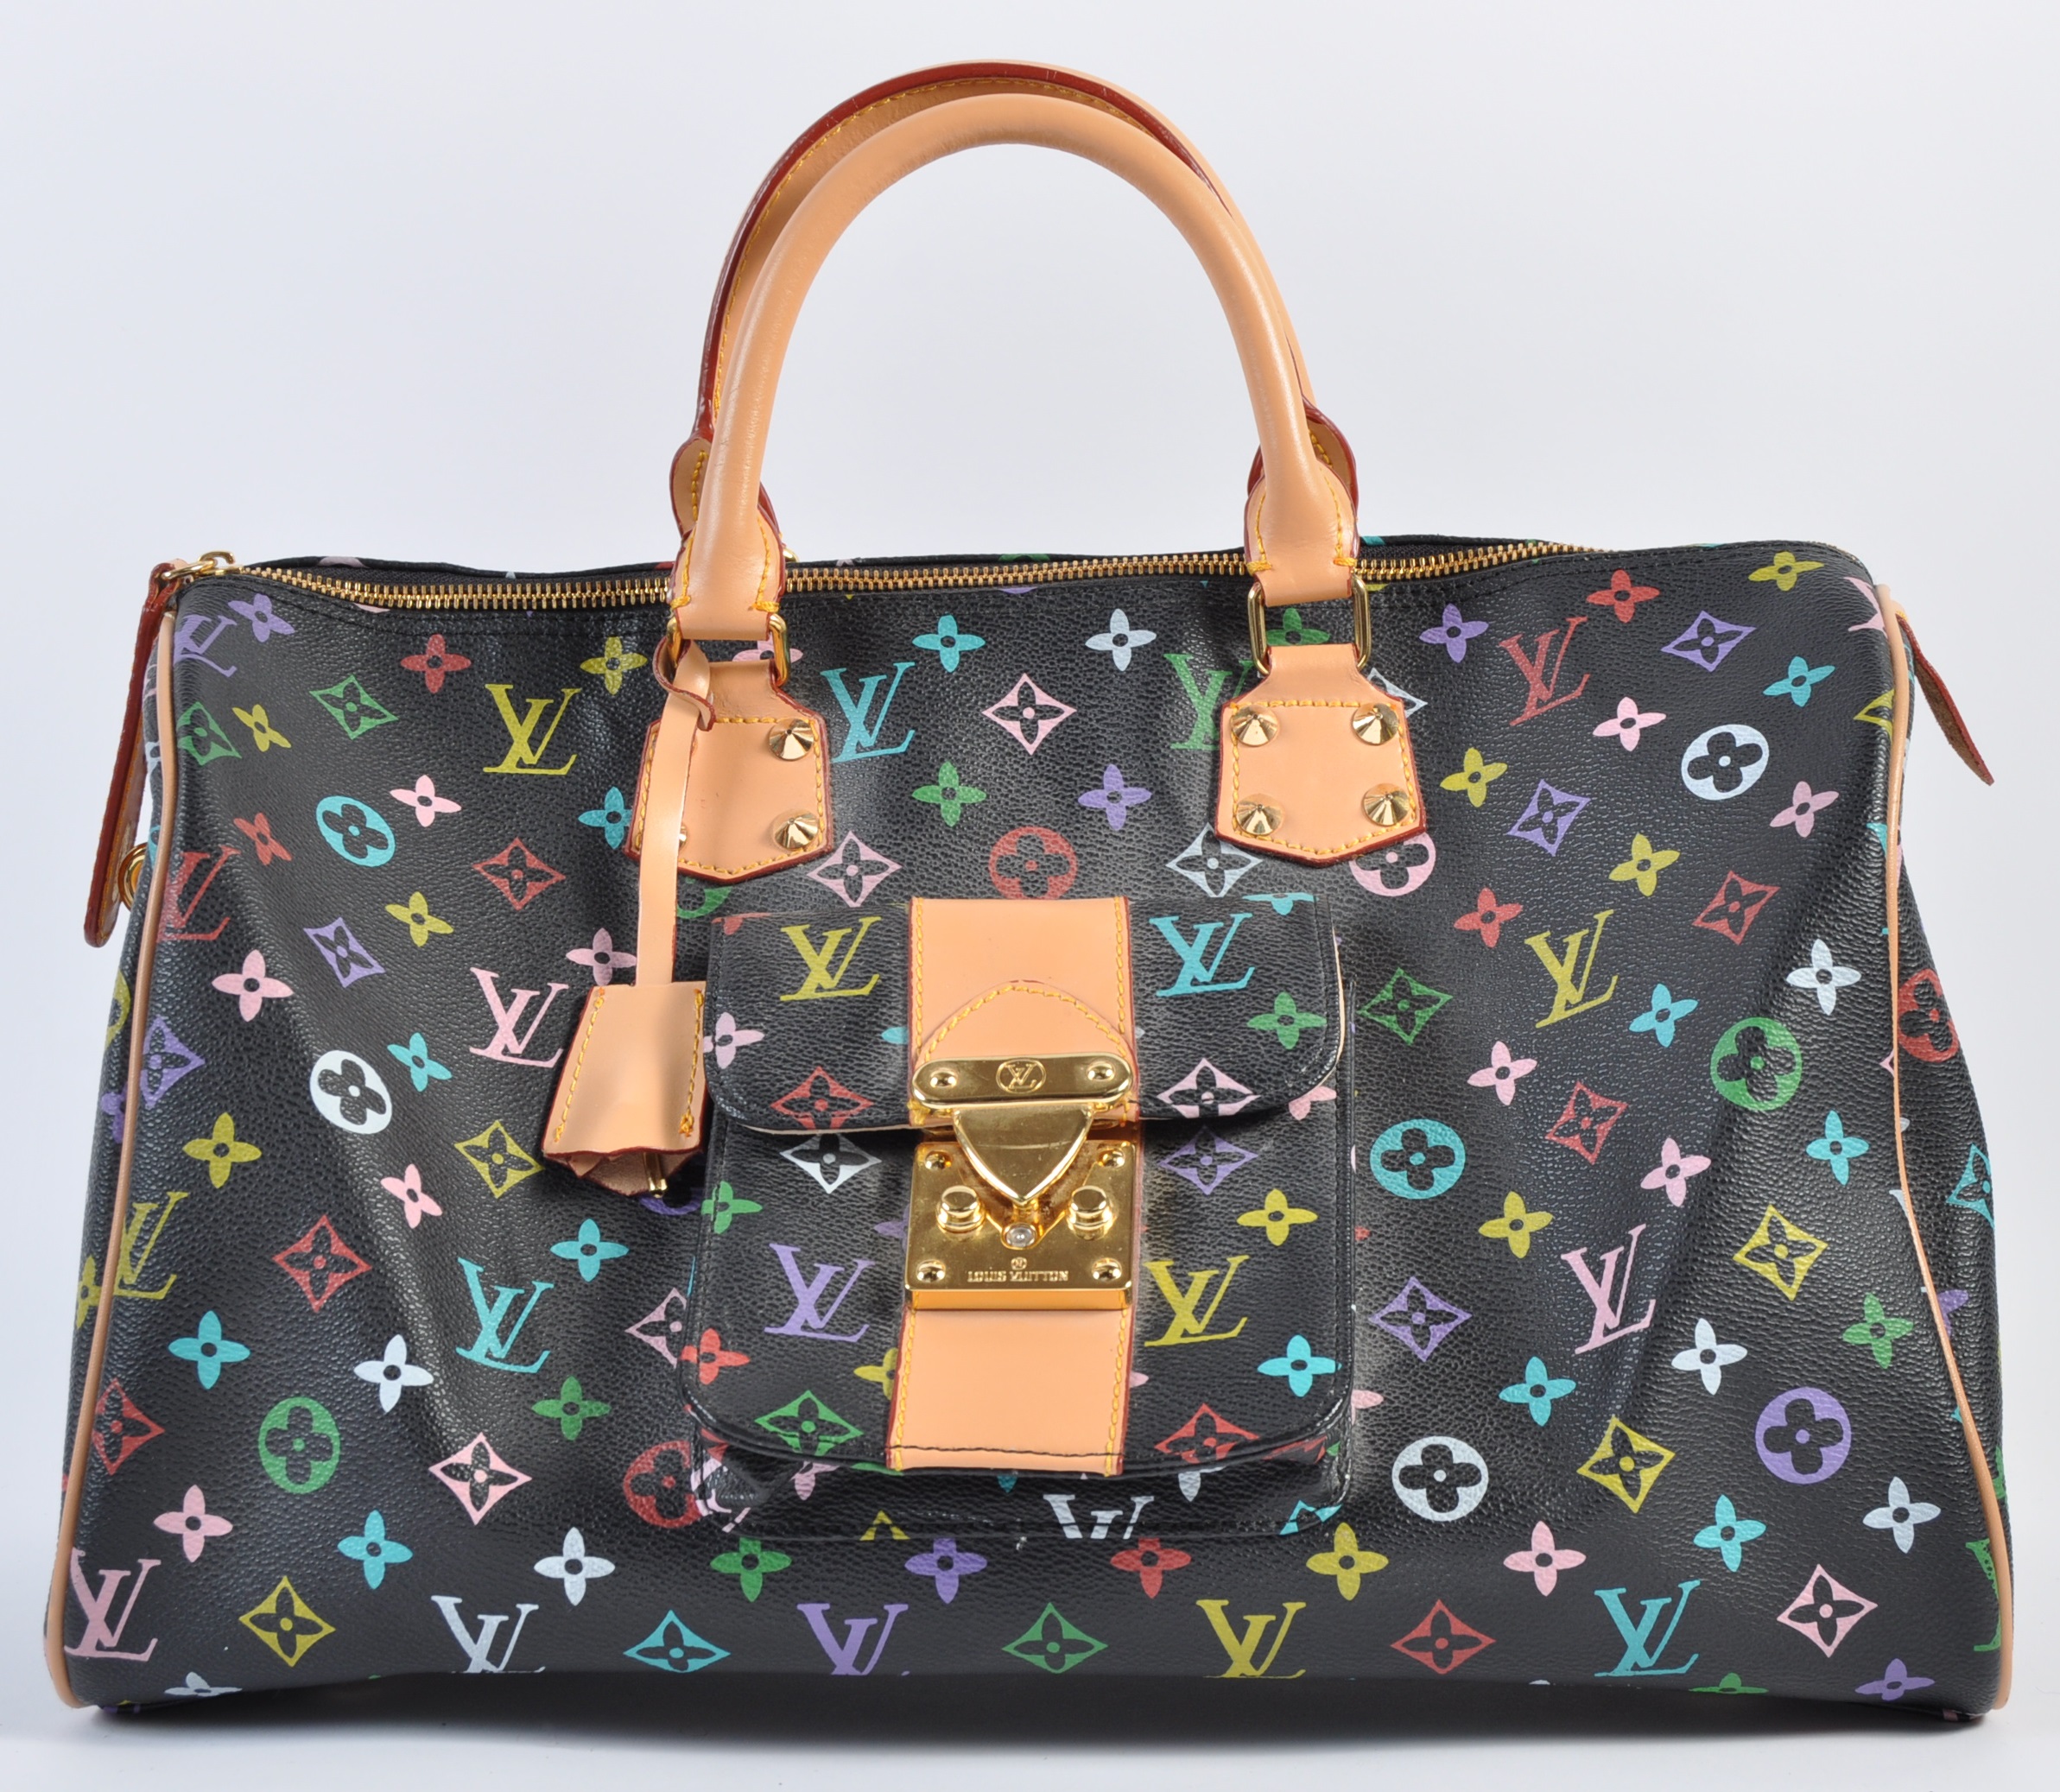 ANGELA GRANT COLLECTION - BEAUTIFUL LOUIS VUITTON